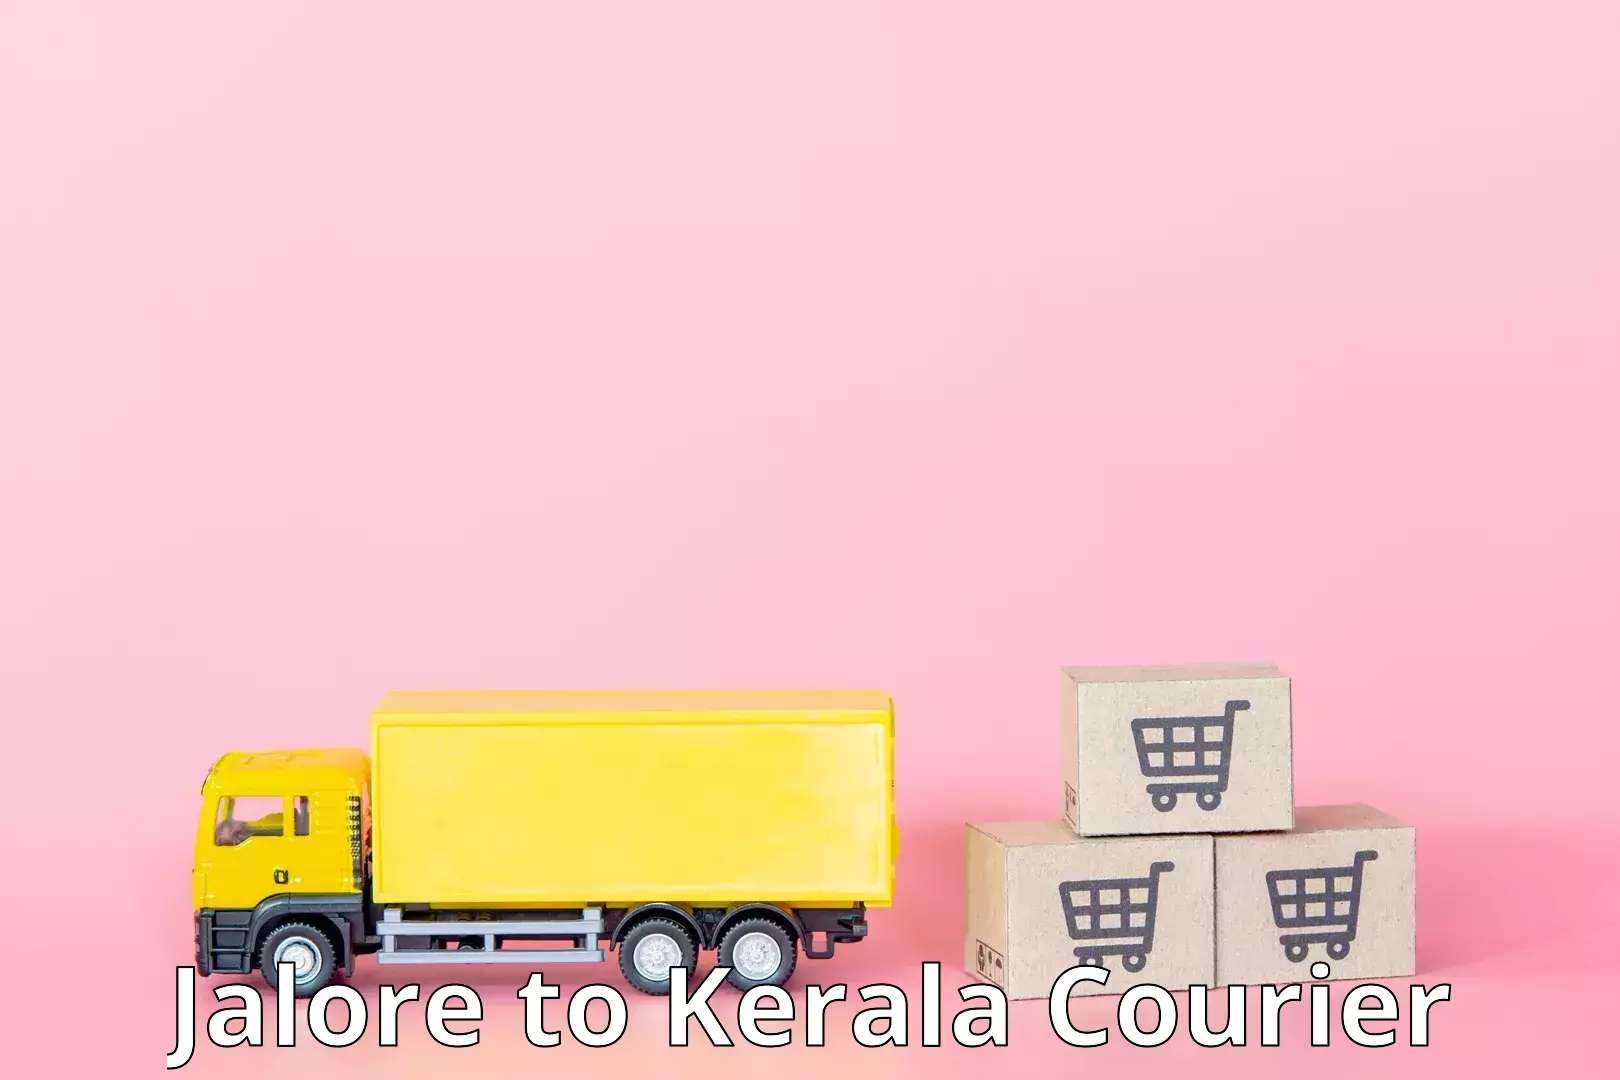 On-demand courier Jalore to Kochi